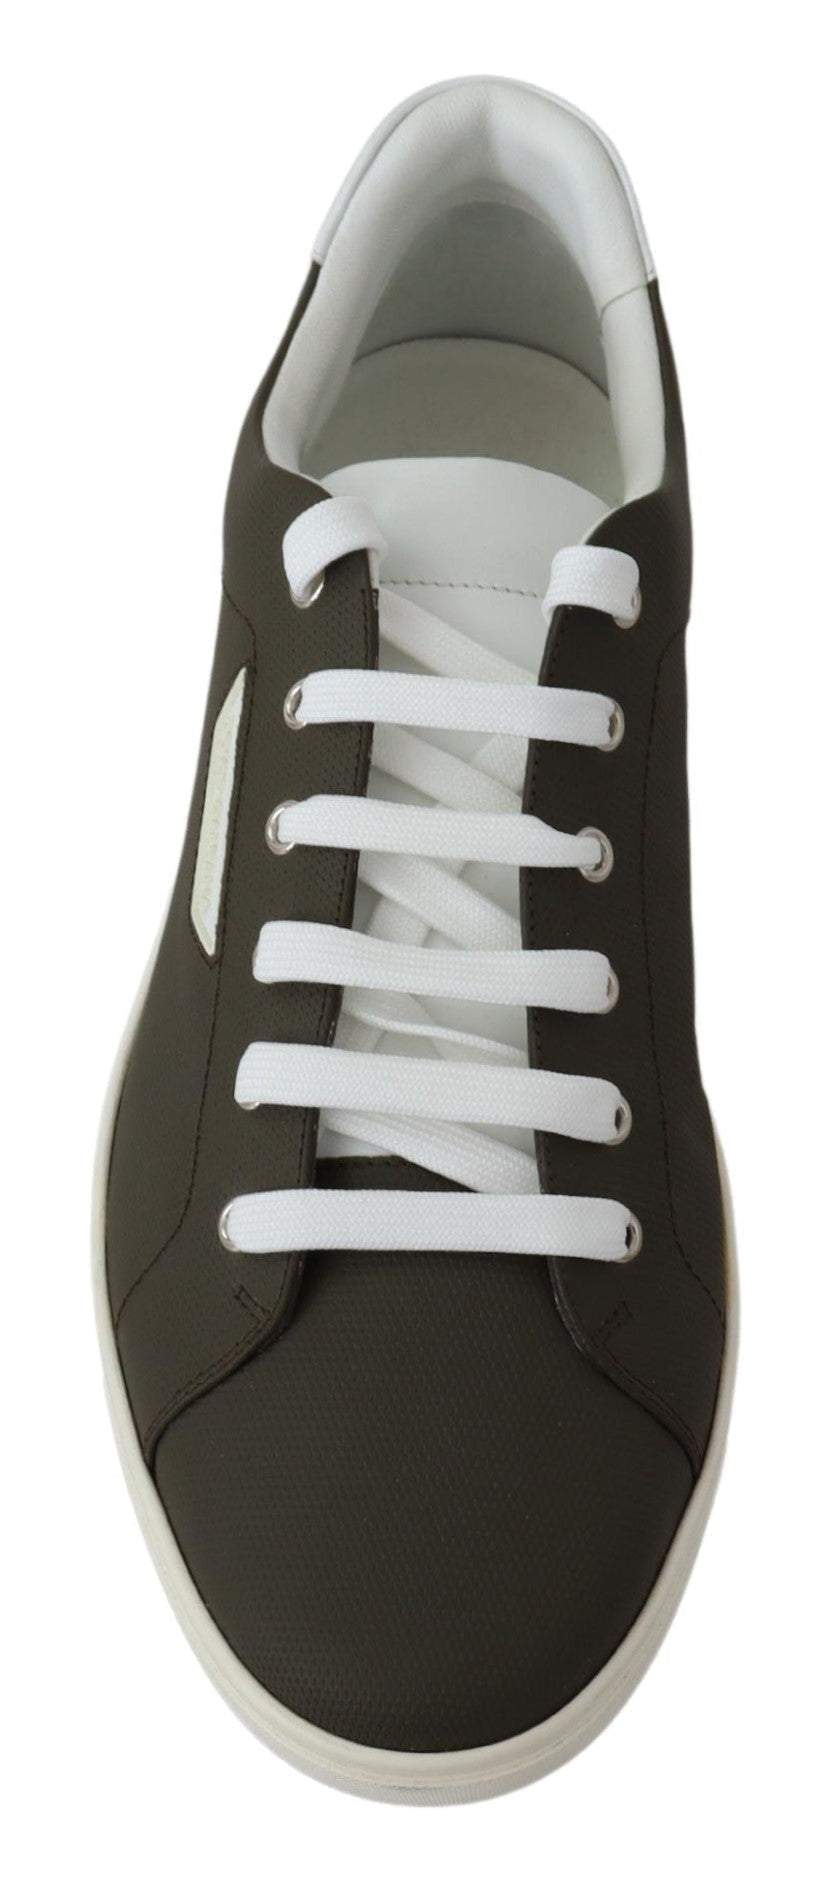 Dolce & Gabbana White Green Leather Low Top Sneakers Shoes #men, Dolce & Gabbana, EU39.5/US6.5, EU39/US6, EU40/US7, EU44.5/US11.5, EU45/US12, feed-agegroup-adult, feed-color-White, feed-gender-male, feed-size-US11.5, feed-size-US12, feed-size-US6, feed-size-US6.5, feed-size-US7, Shoes - New Arrivals, Sneakers - Men - Shoes, White at SEYMAYKA